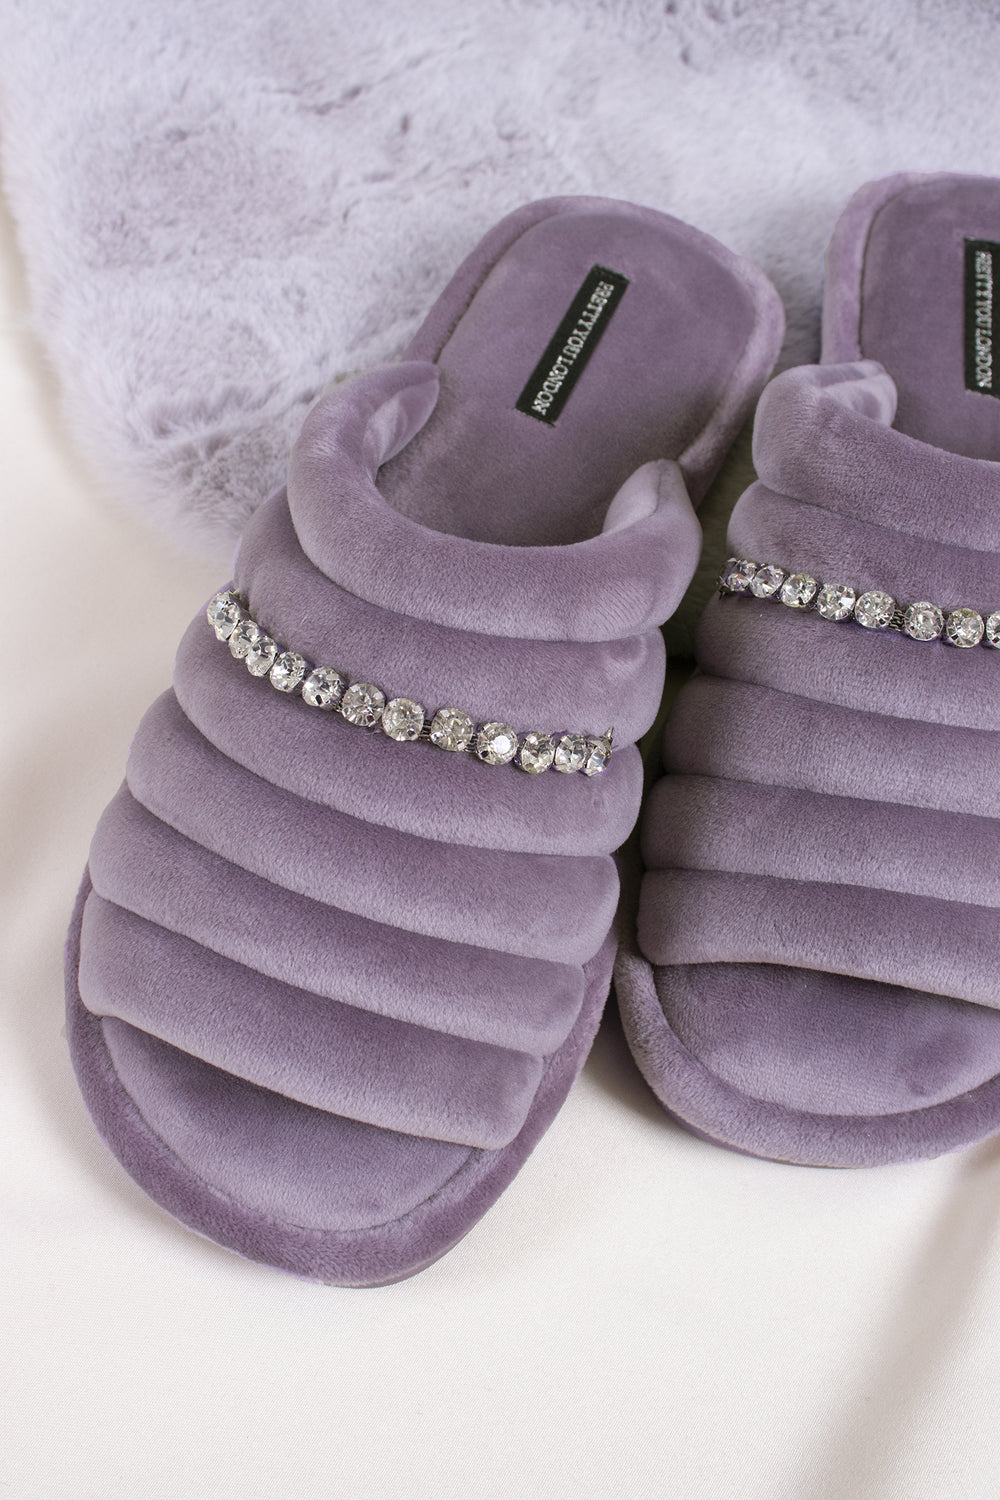 Frankie women's slider slippers in lavender combining super-soft microfibre materials with a glistening crystal diamante strap from Pretty You London